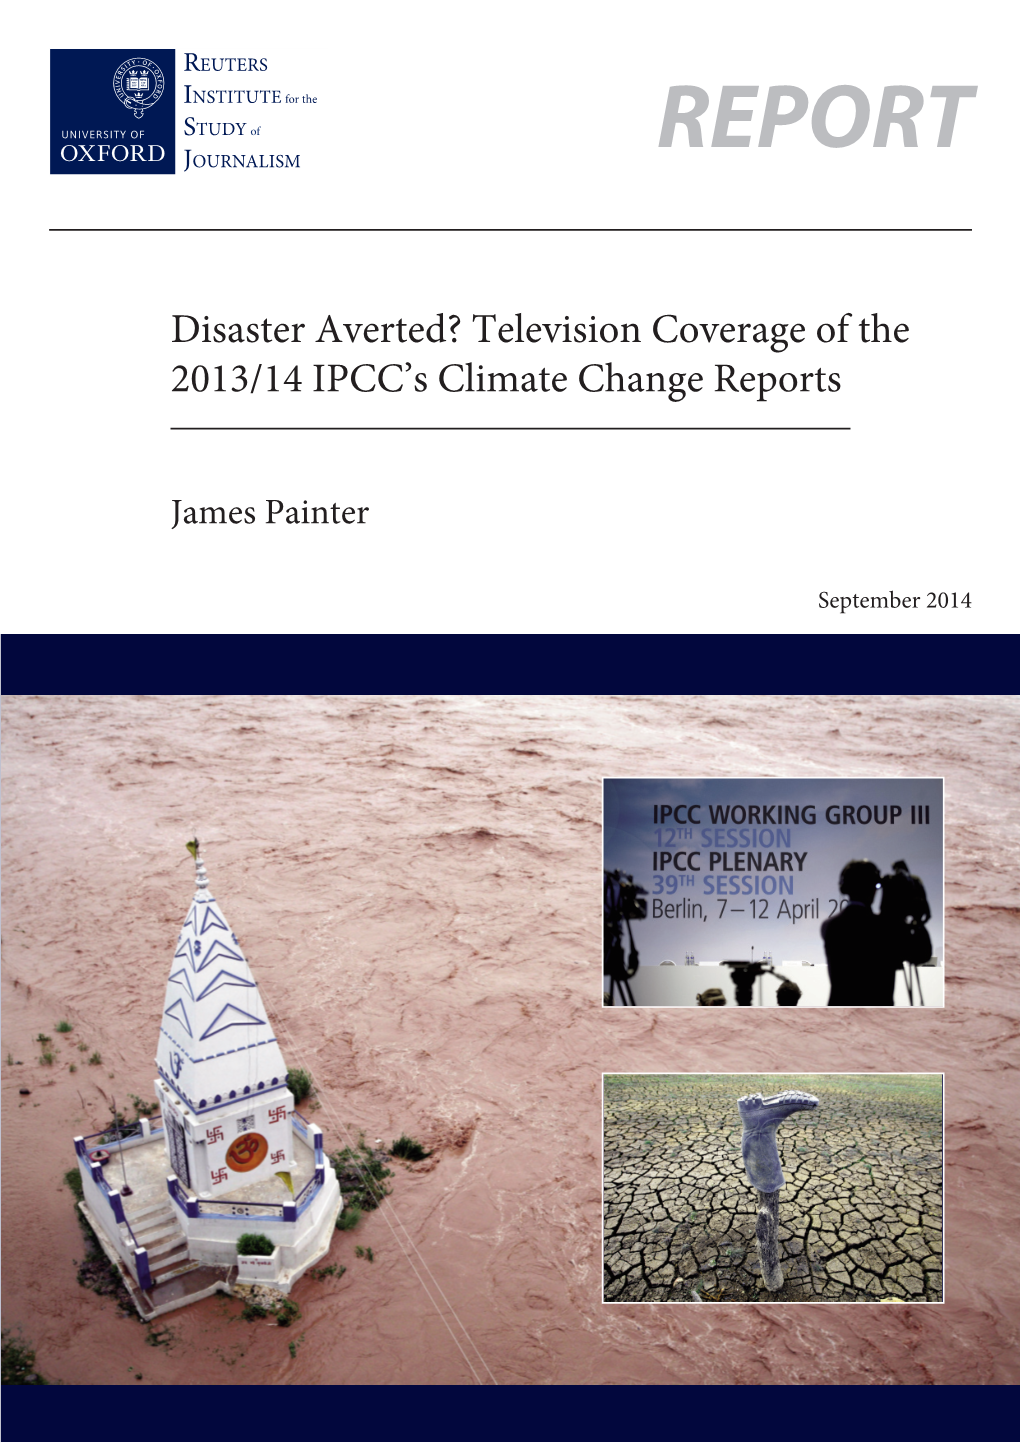 Television Coverage of the 2013/14 IPCC's Climate